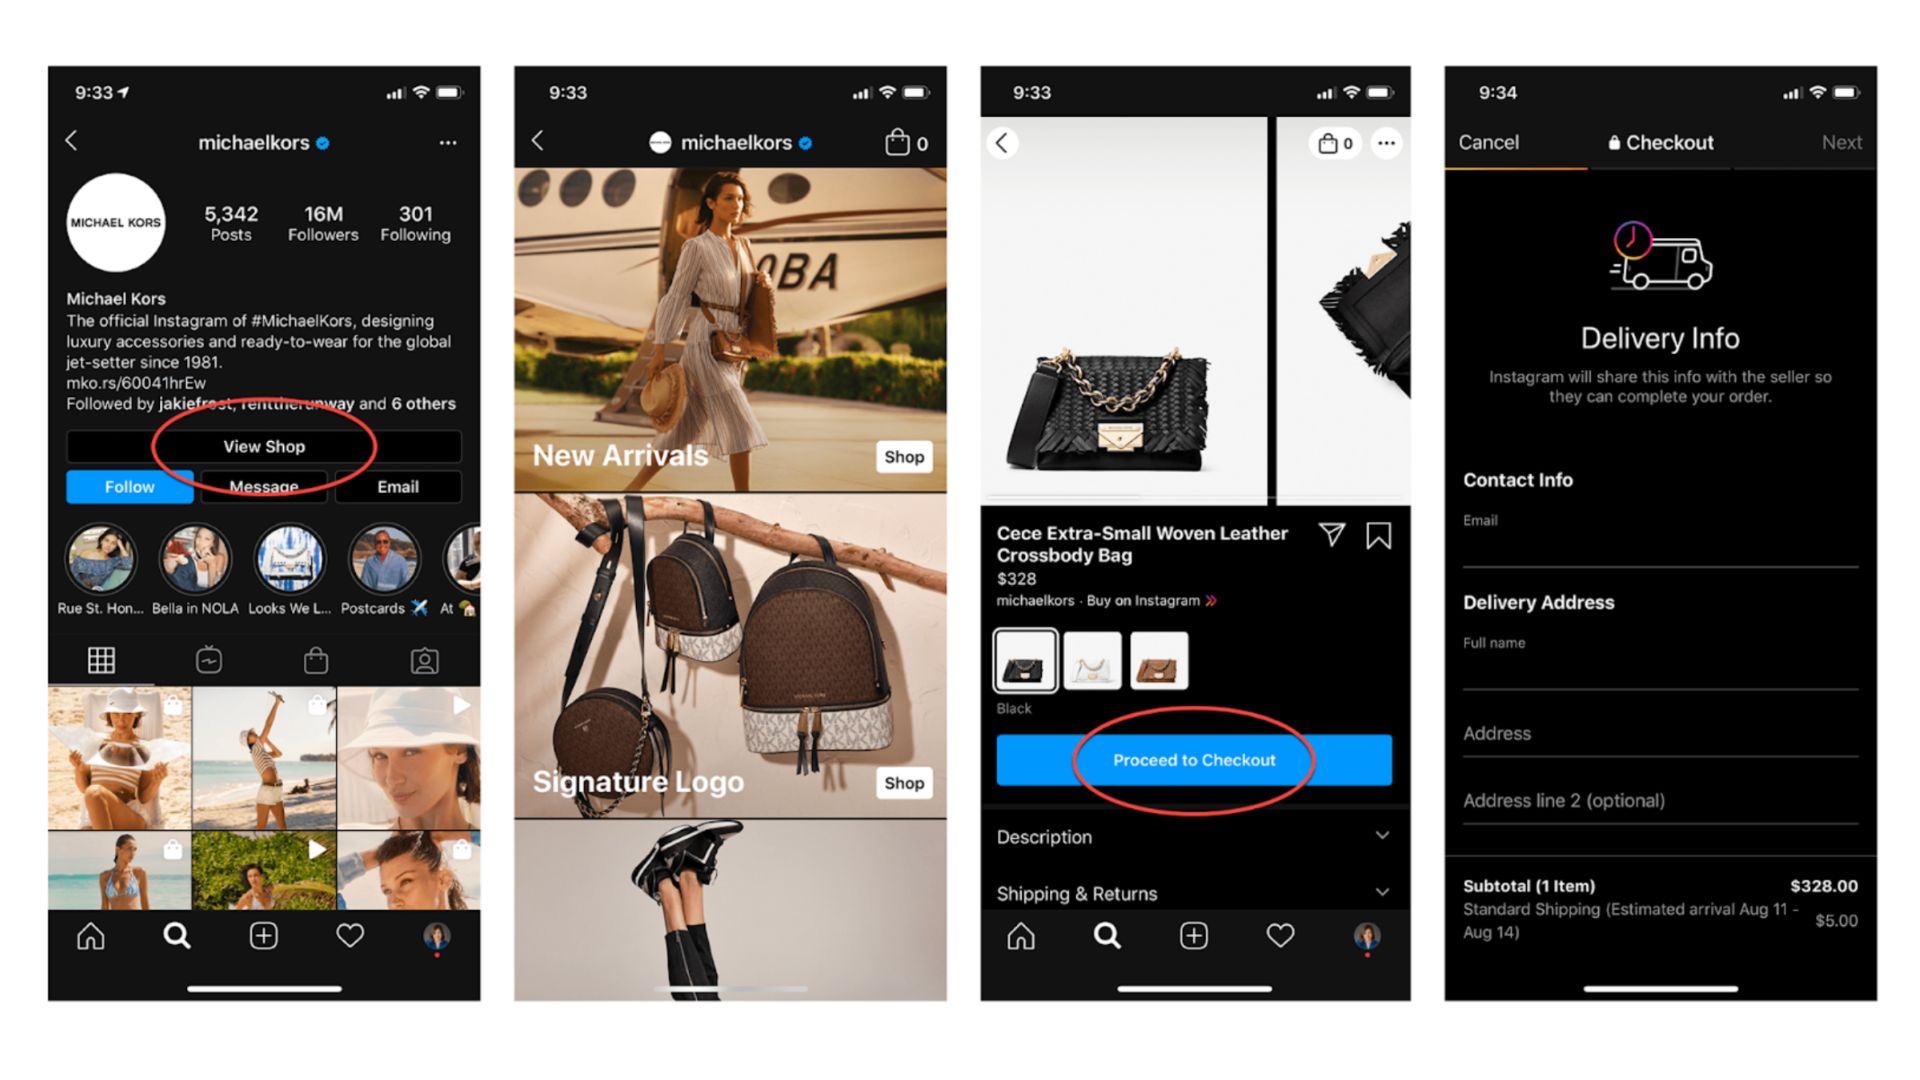 Smartphone screens featuring a social media shopping interface reflect a key e-commerce trend, highlighting the integration of social platforms and online shopping to facilitate immediate sales and influencer promotions.